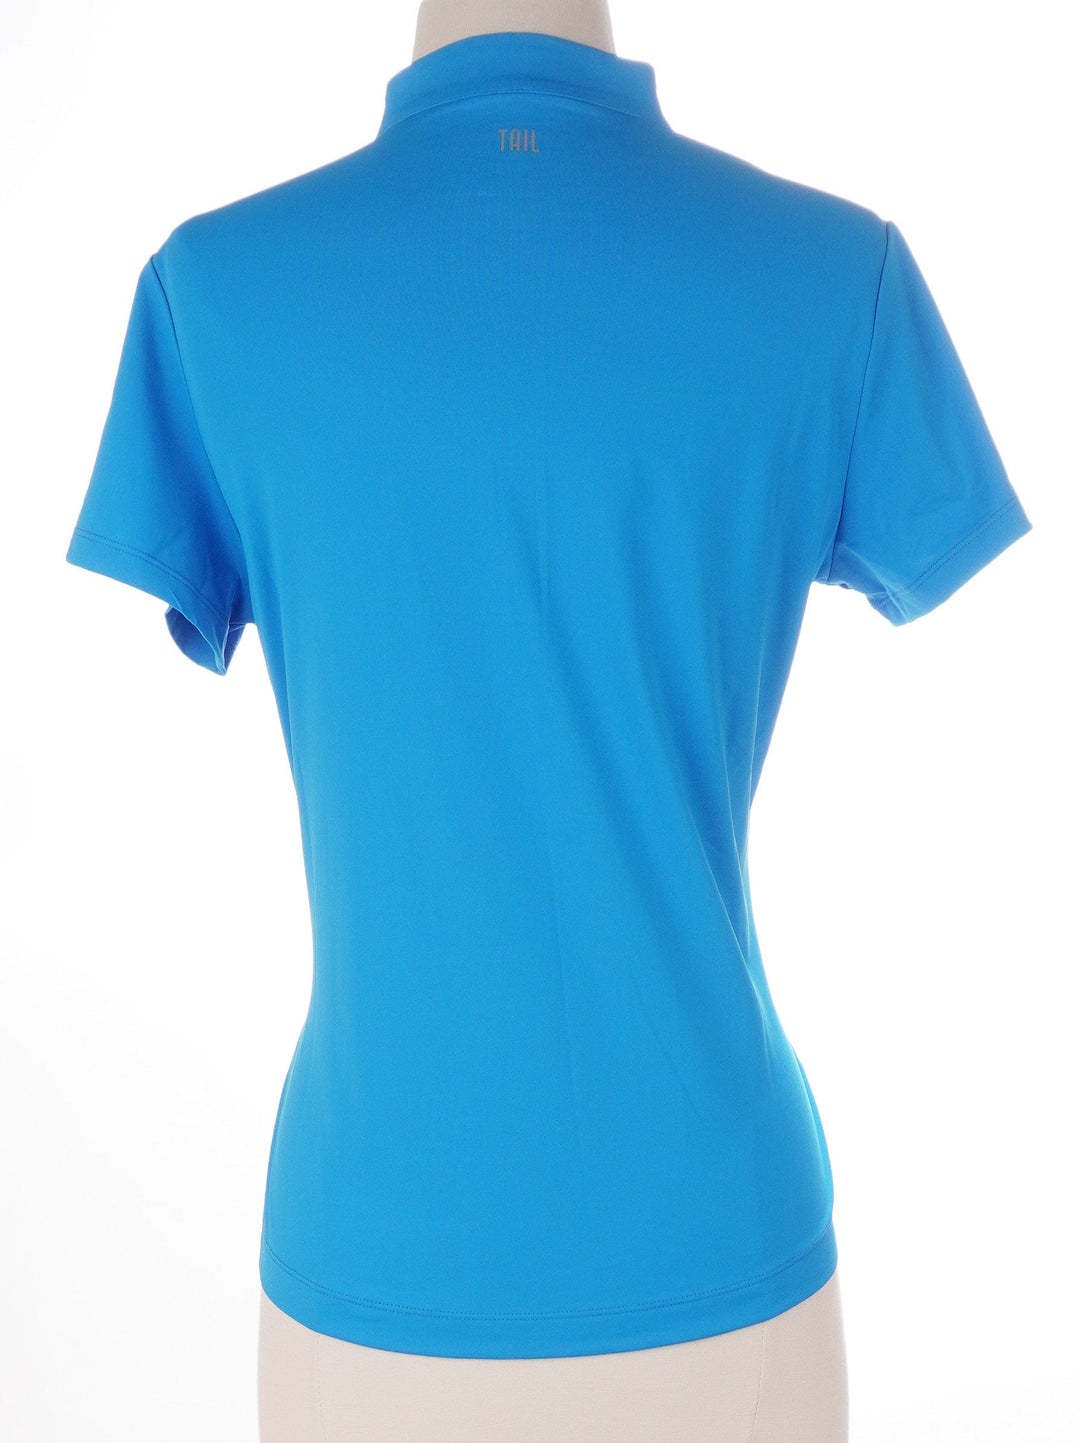 Tail Blue / Small Tail Short Sleeve Top - Destiny Blue - Size Small